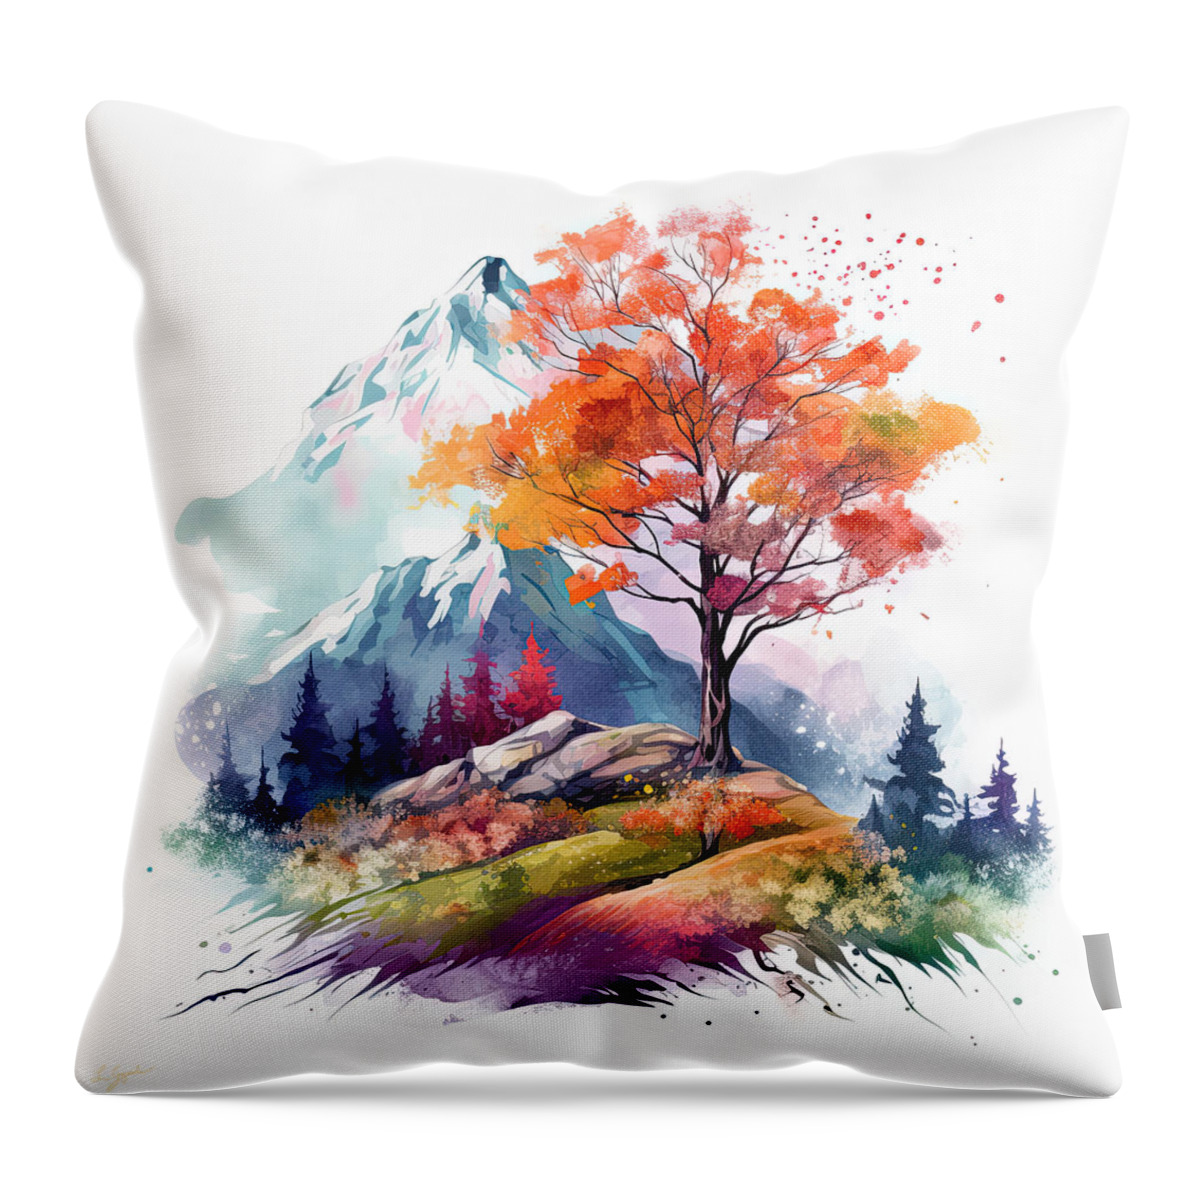 Four Seasons Throw Pillow featuring the painting Vibrant Four Seasons Landscapes by Lourry Legarde